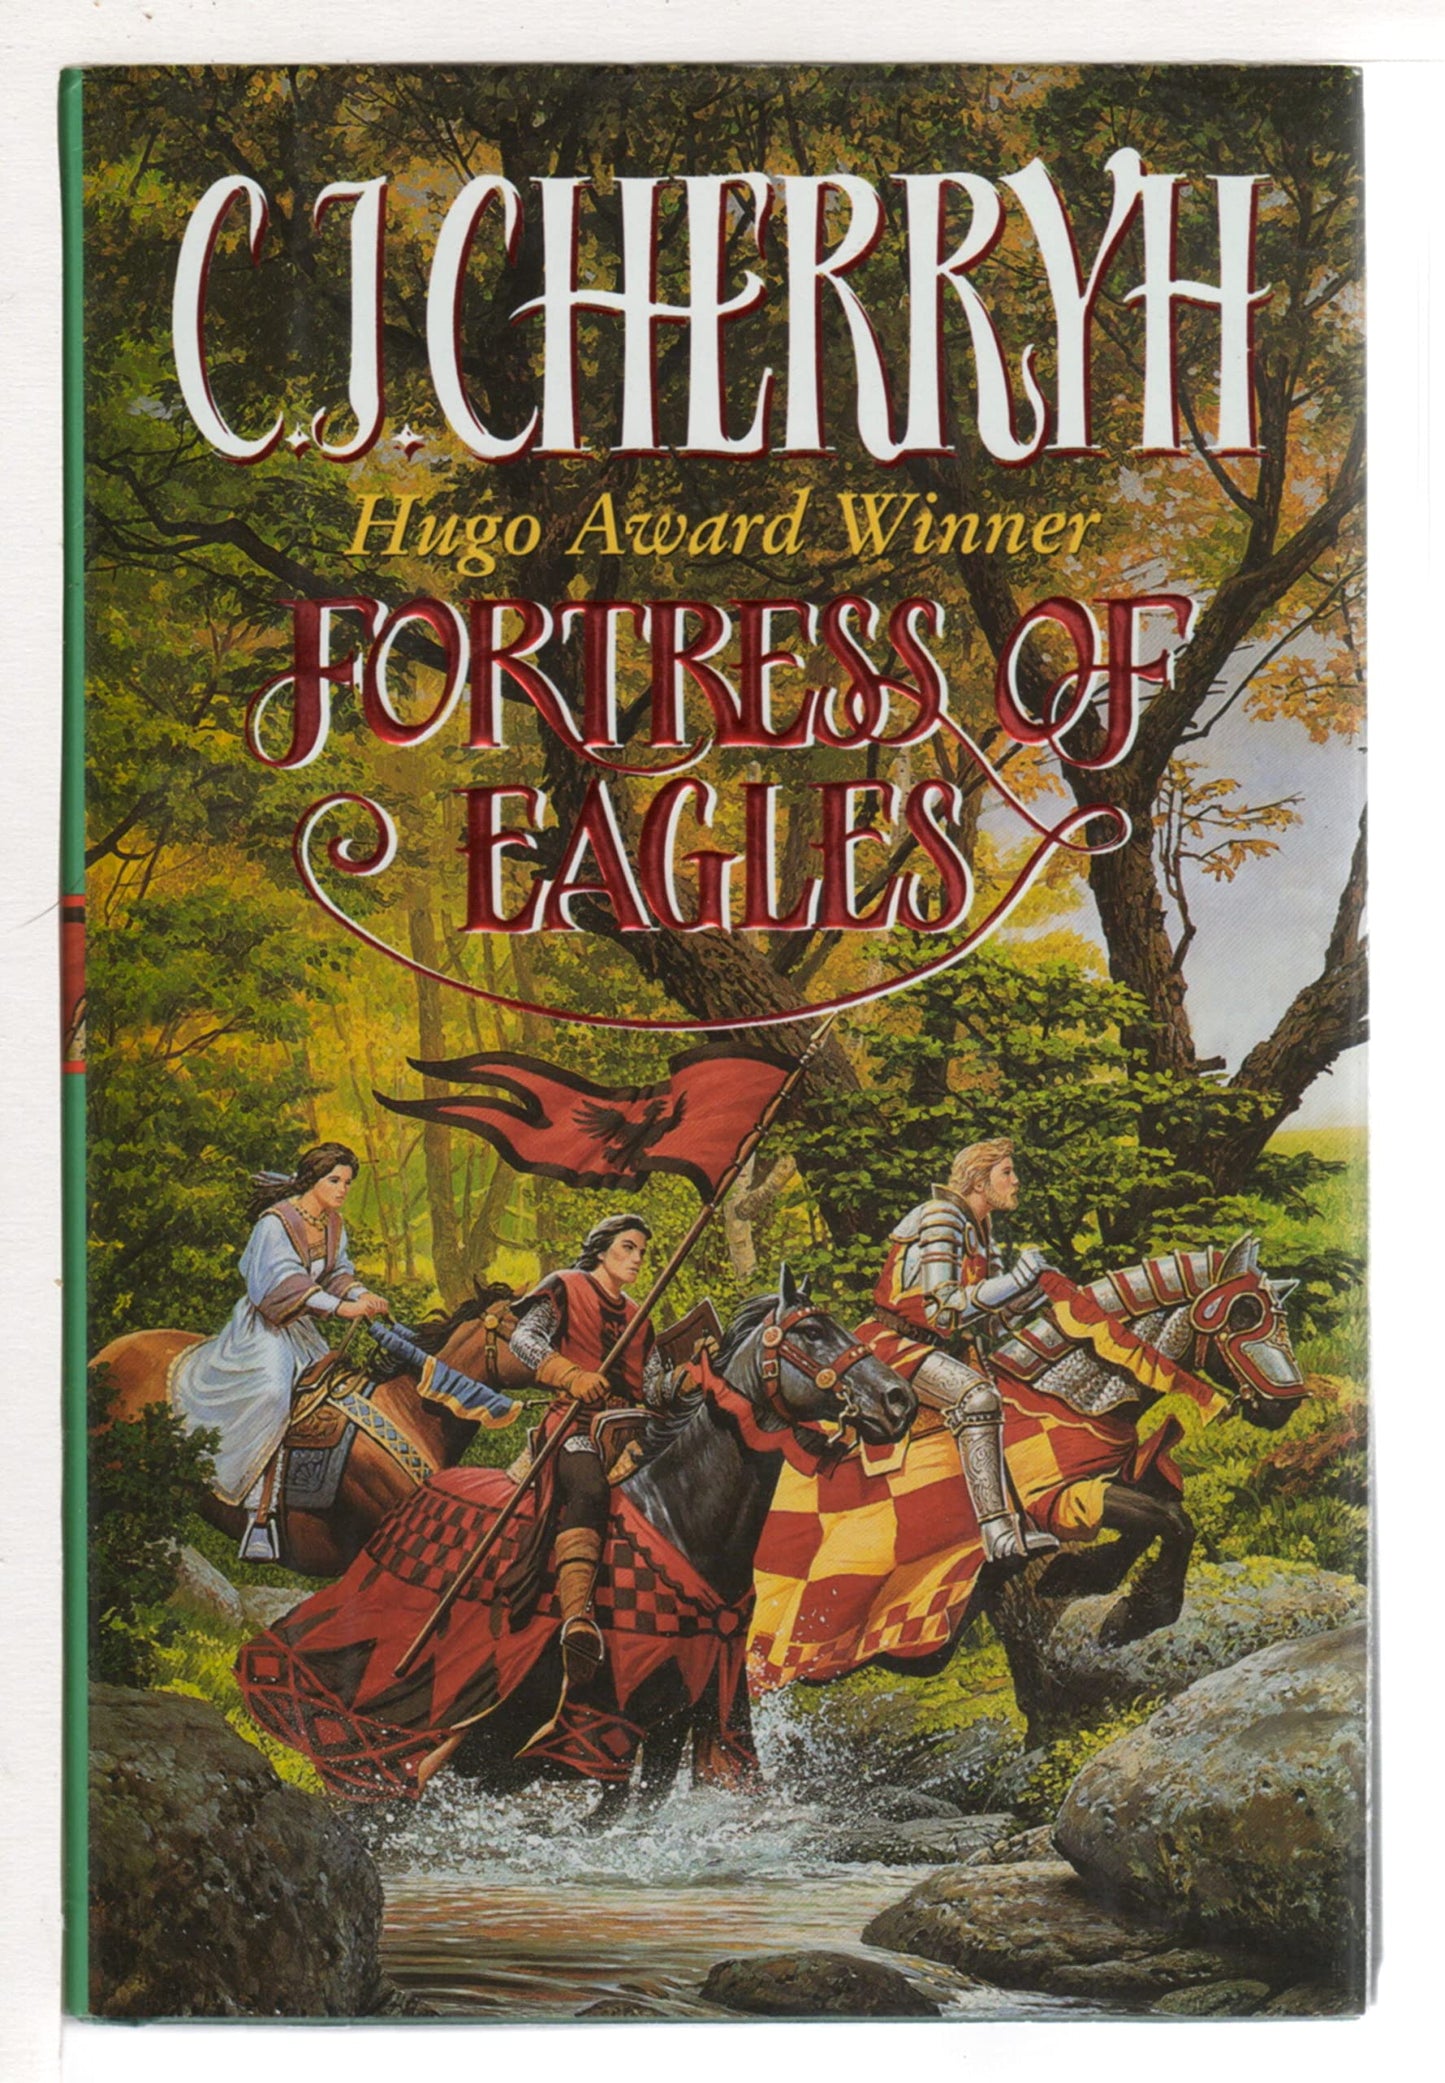 Fortress of Eagles